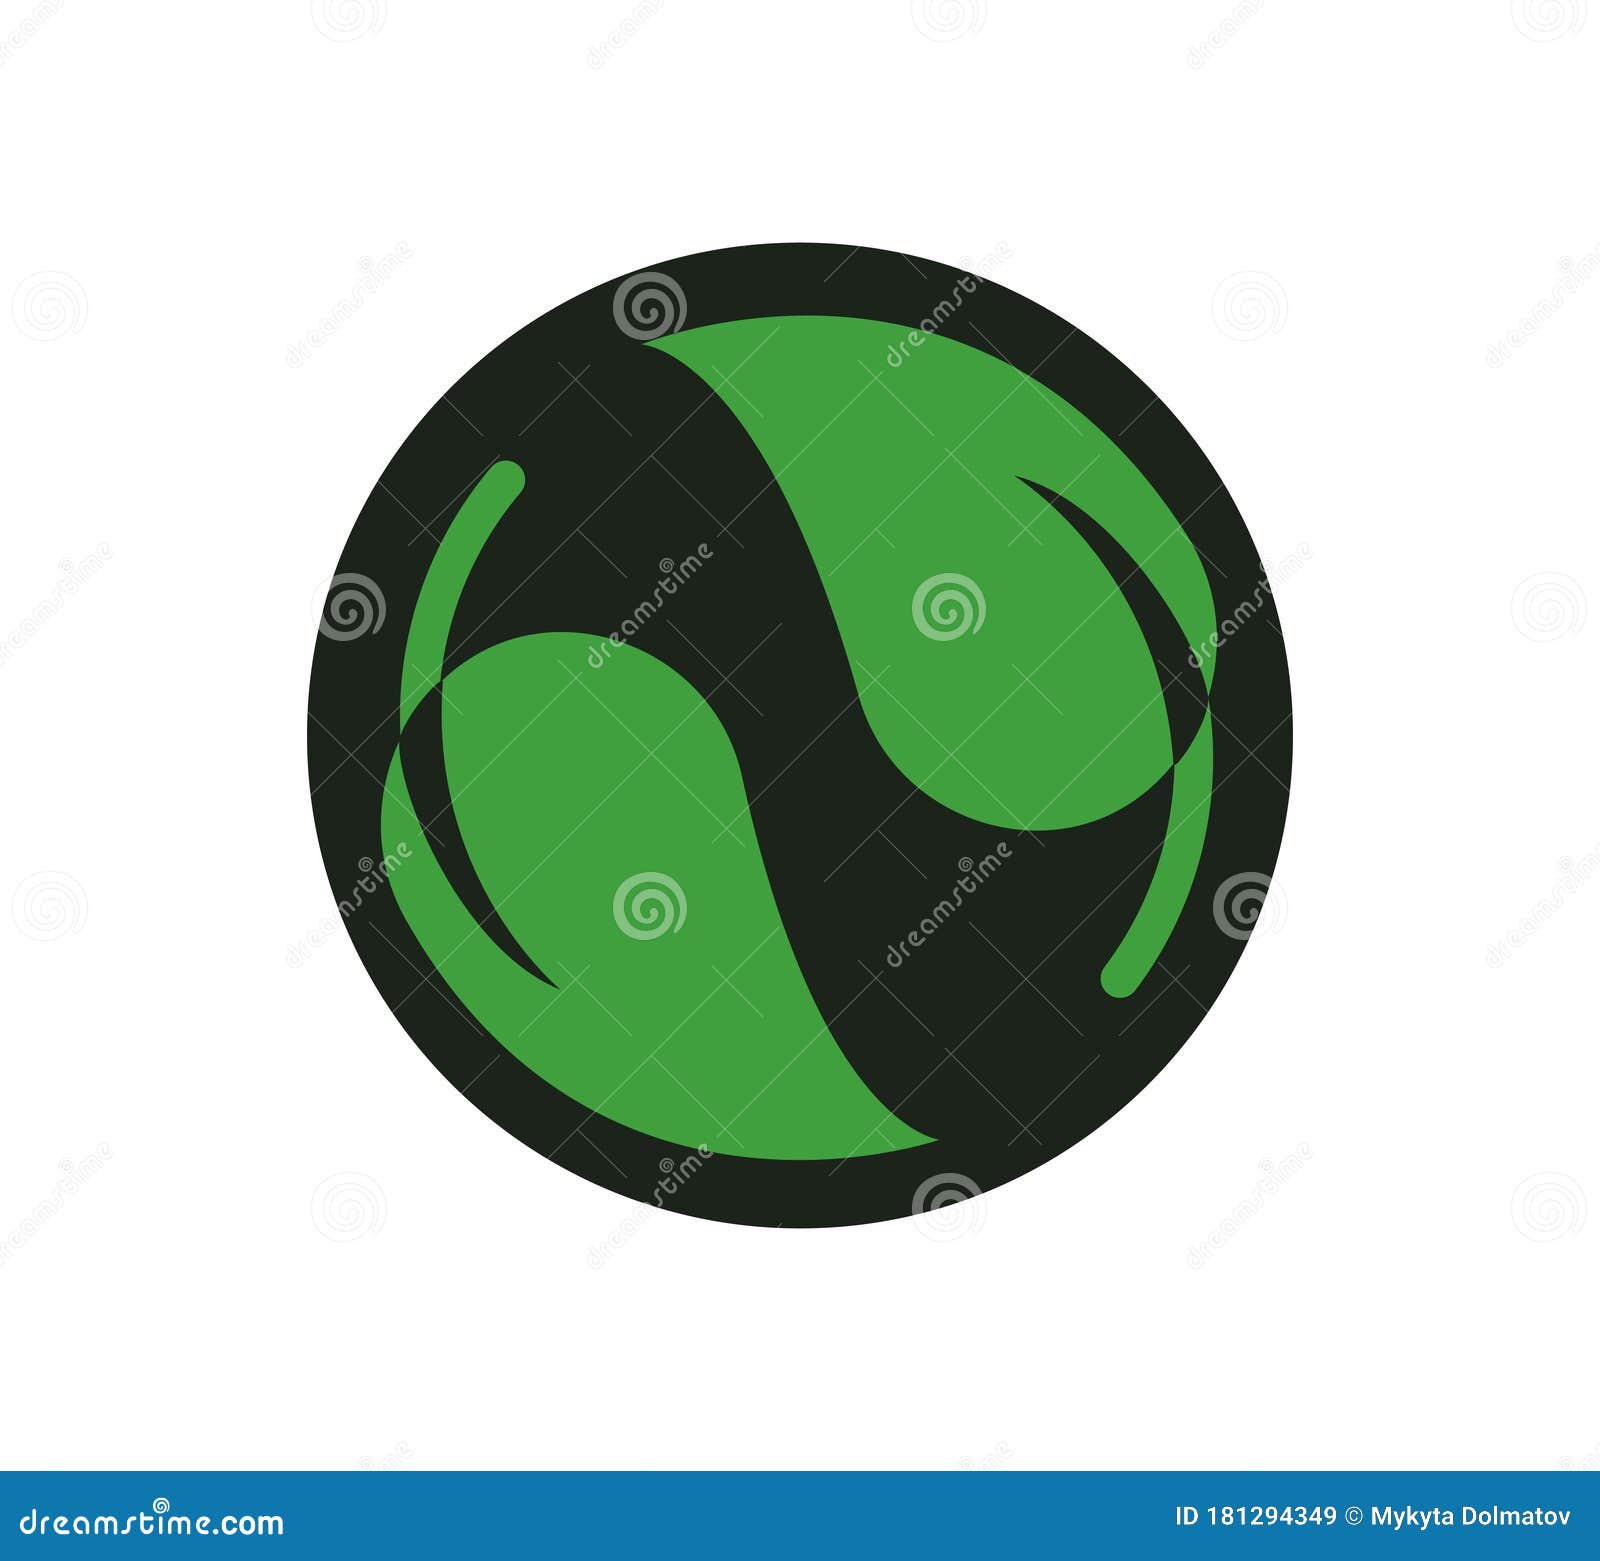 biodegradable recyclable plastic free package icon.  bio recyclable degradable label logo template